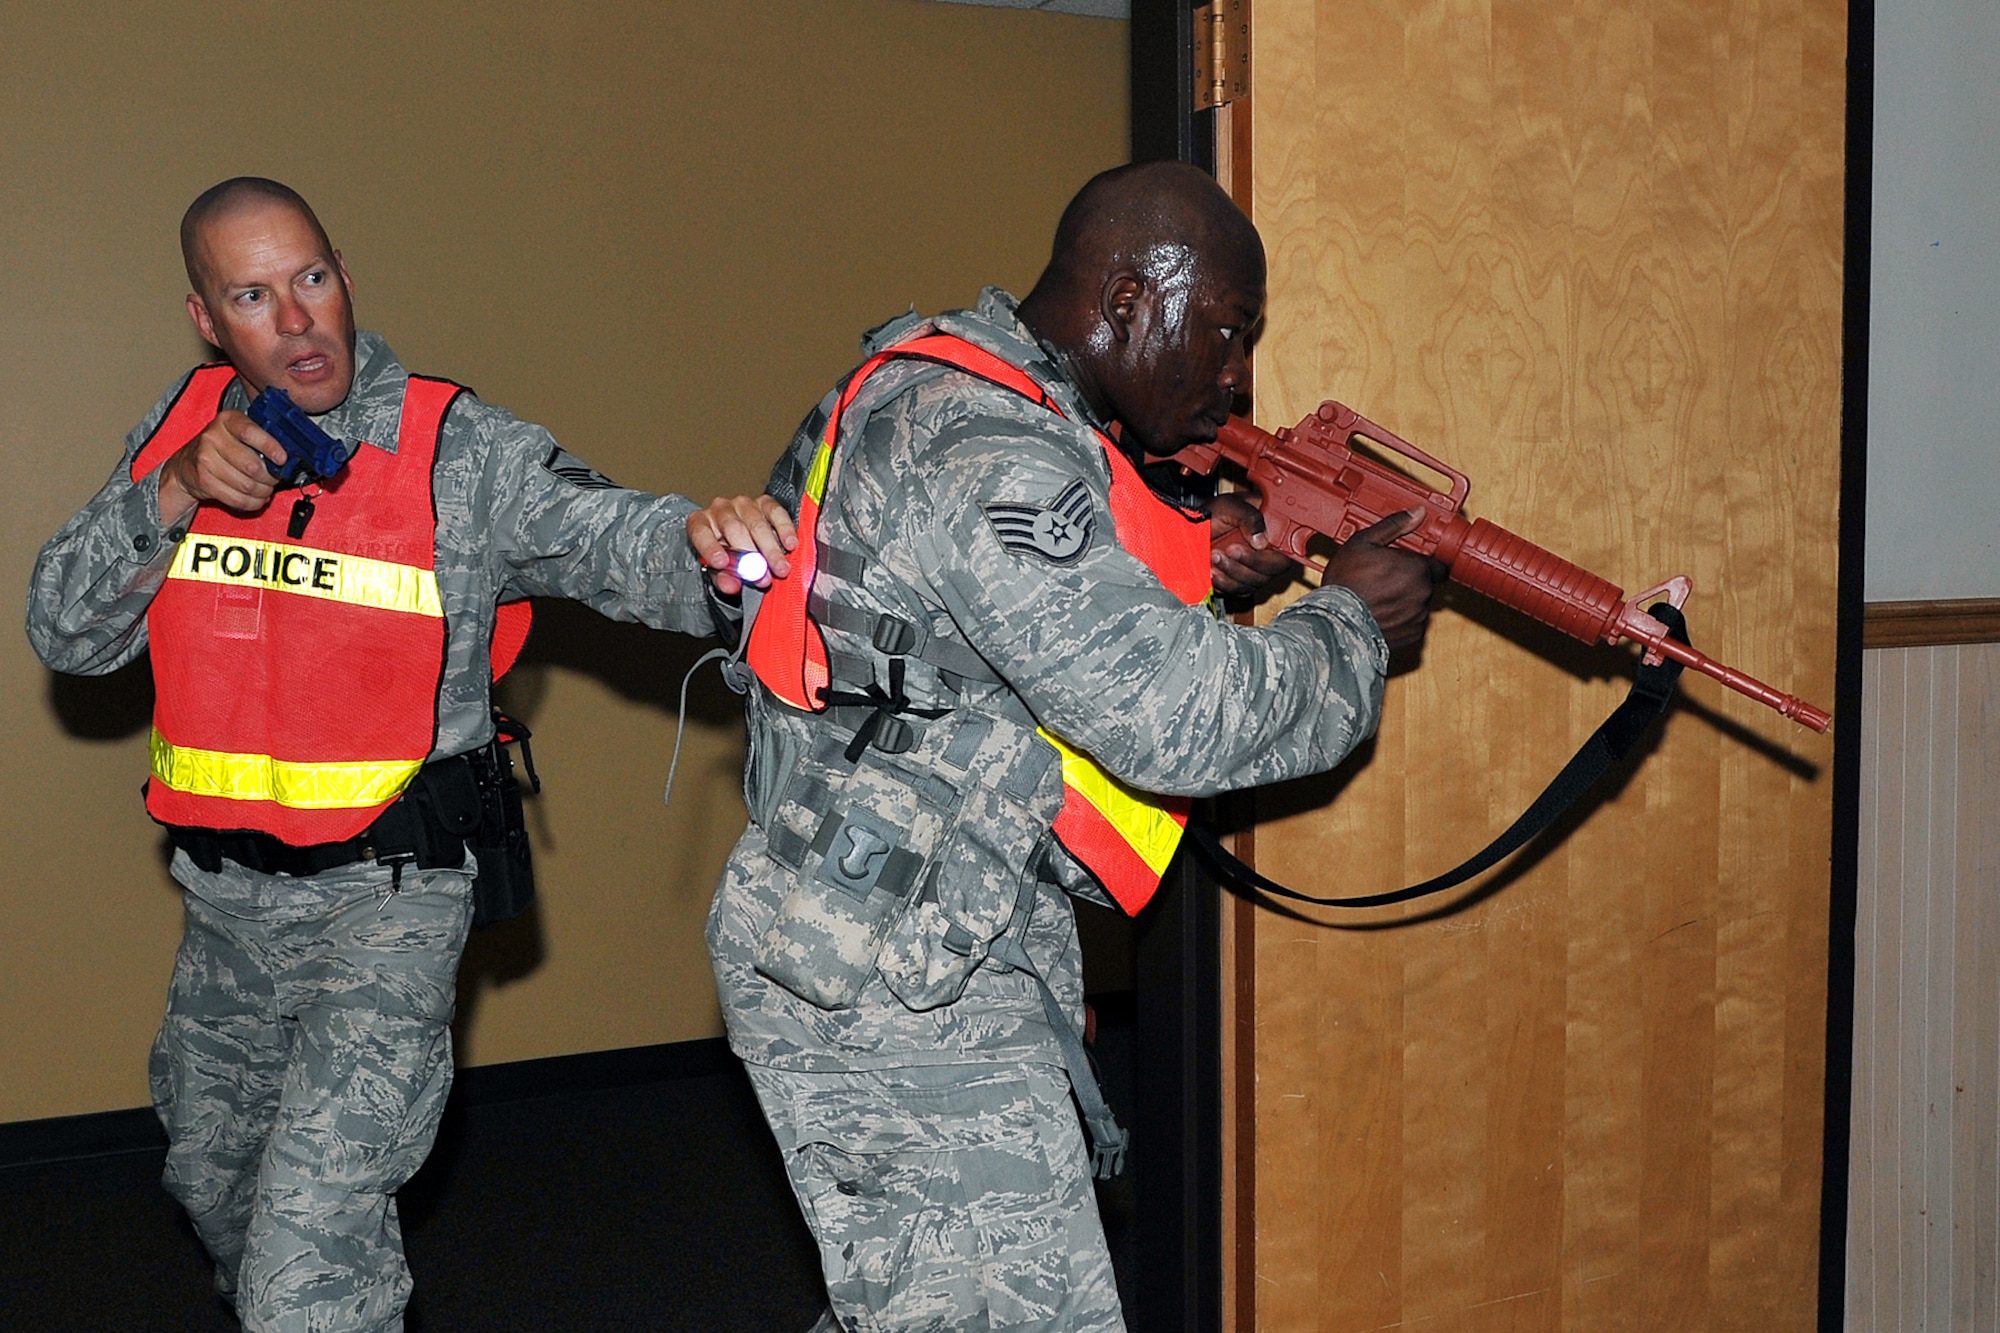 OFFUTT AIR FORCE BASE, Neb. - Master Sgt. Steven Flamming and Staff Sgt. Marcus Stokes, 55th Security Forces Squadron, scan a room inside Bldg. C during an active shooter exercise Sept. 10. Building C is the base's main customer support building. Team Offutt's first responders conduct various exercise scenarios throughout the year to prepare for possible threats to people and resources. U.S. Air Force photo by Charles Haymond